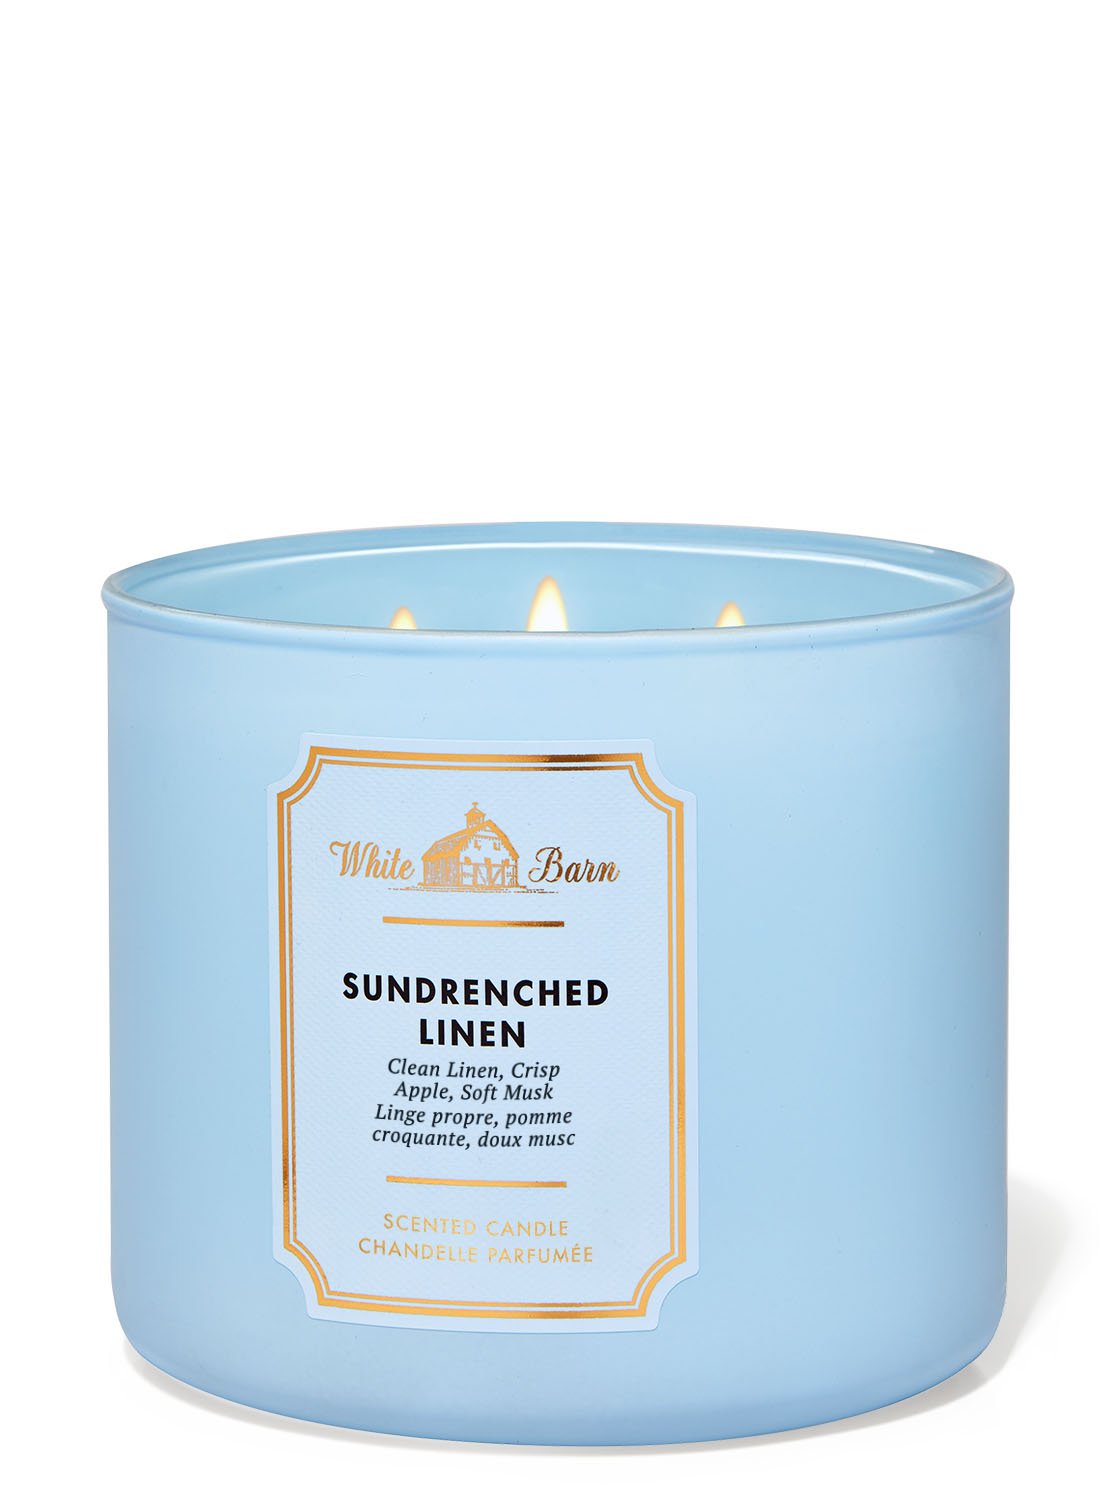 Sun-Drenched Linen 3-Wick Candle | Bath and Body Works